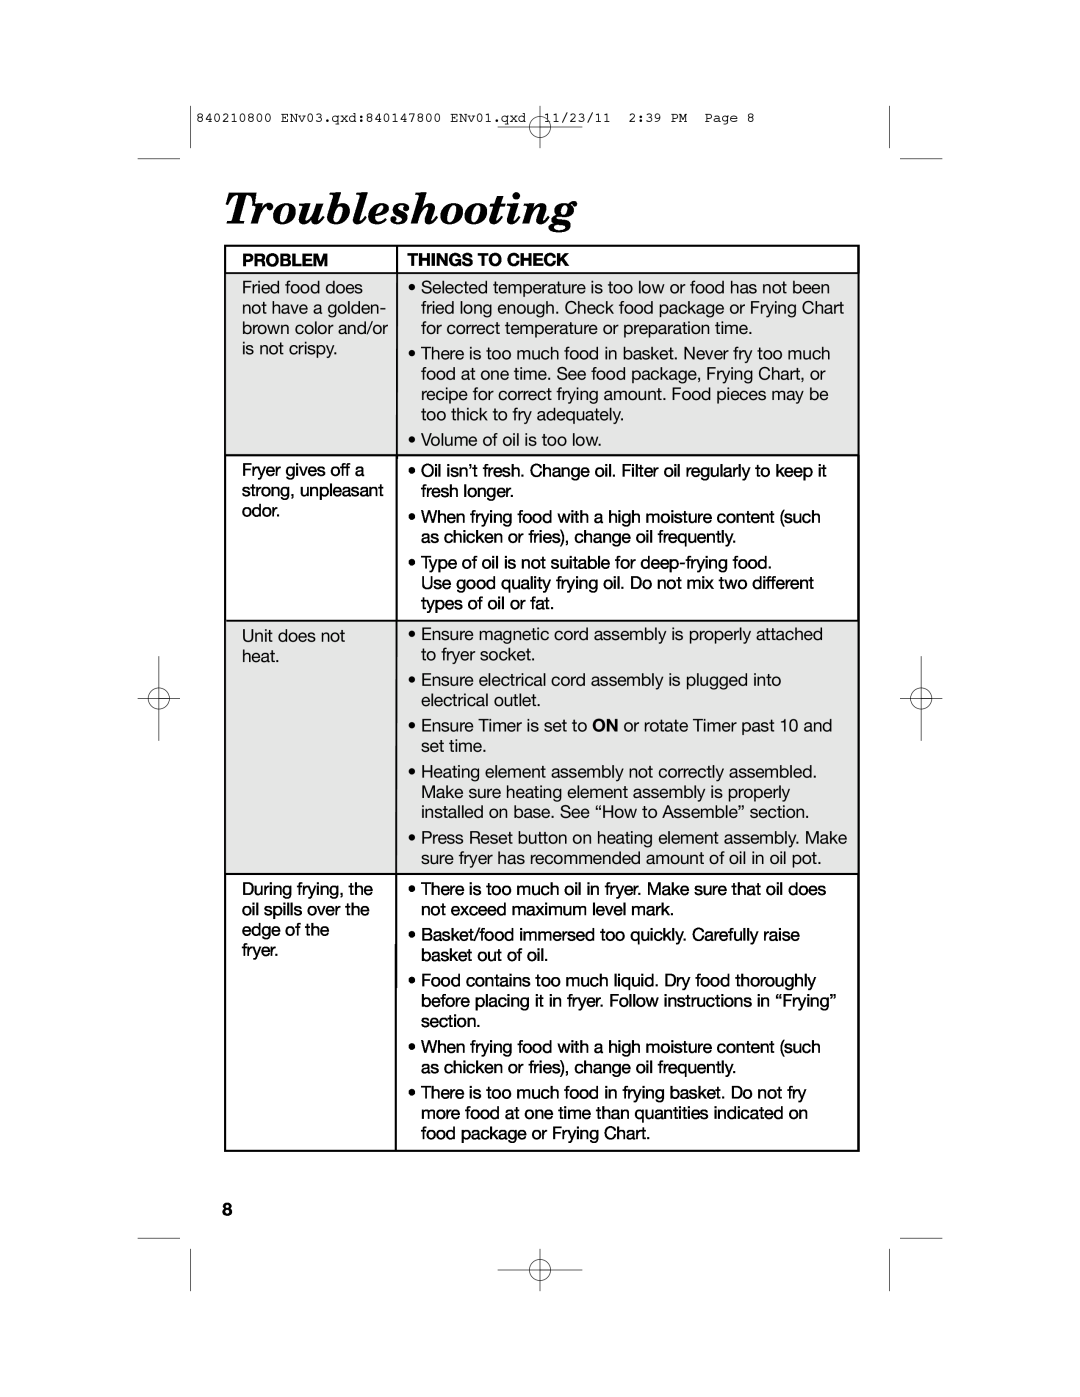 Hamilton Beach 35200 manual Troubleshooting, Problem, Things To Check 